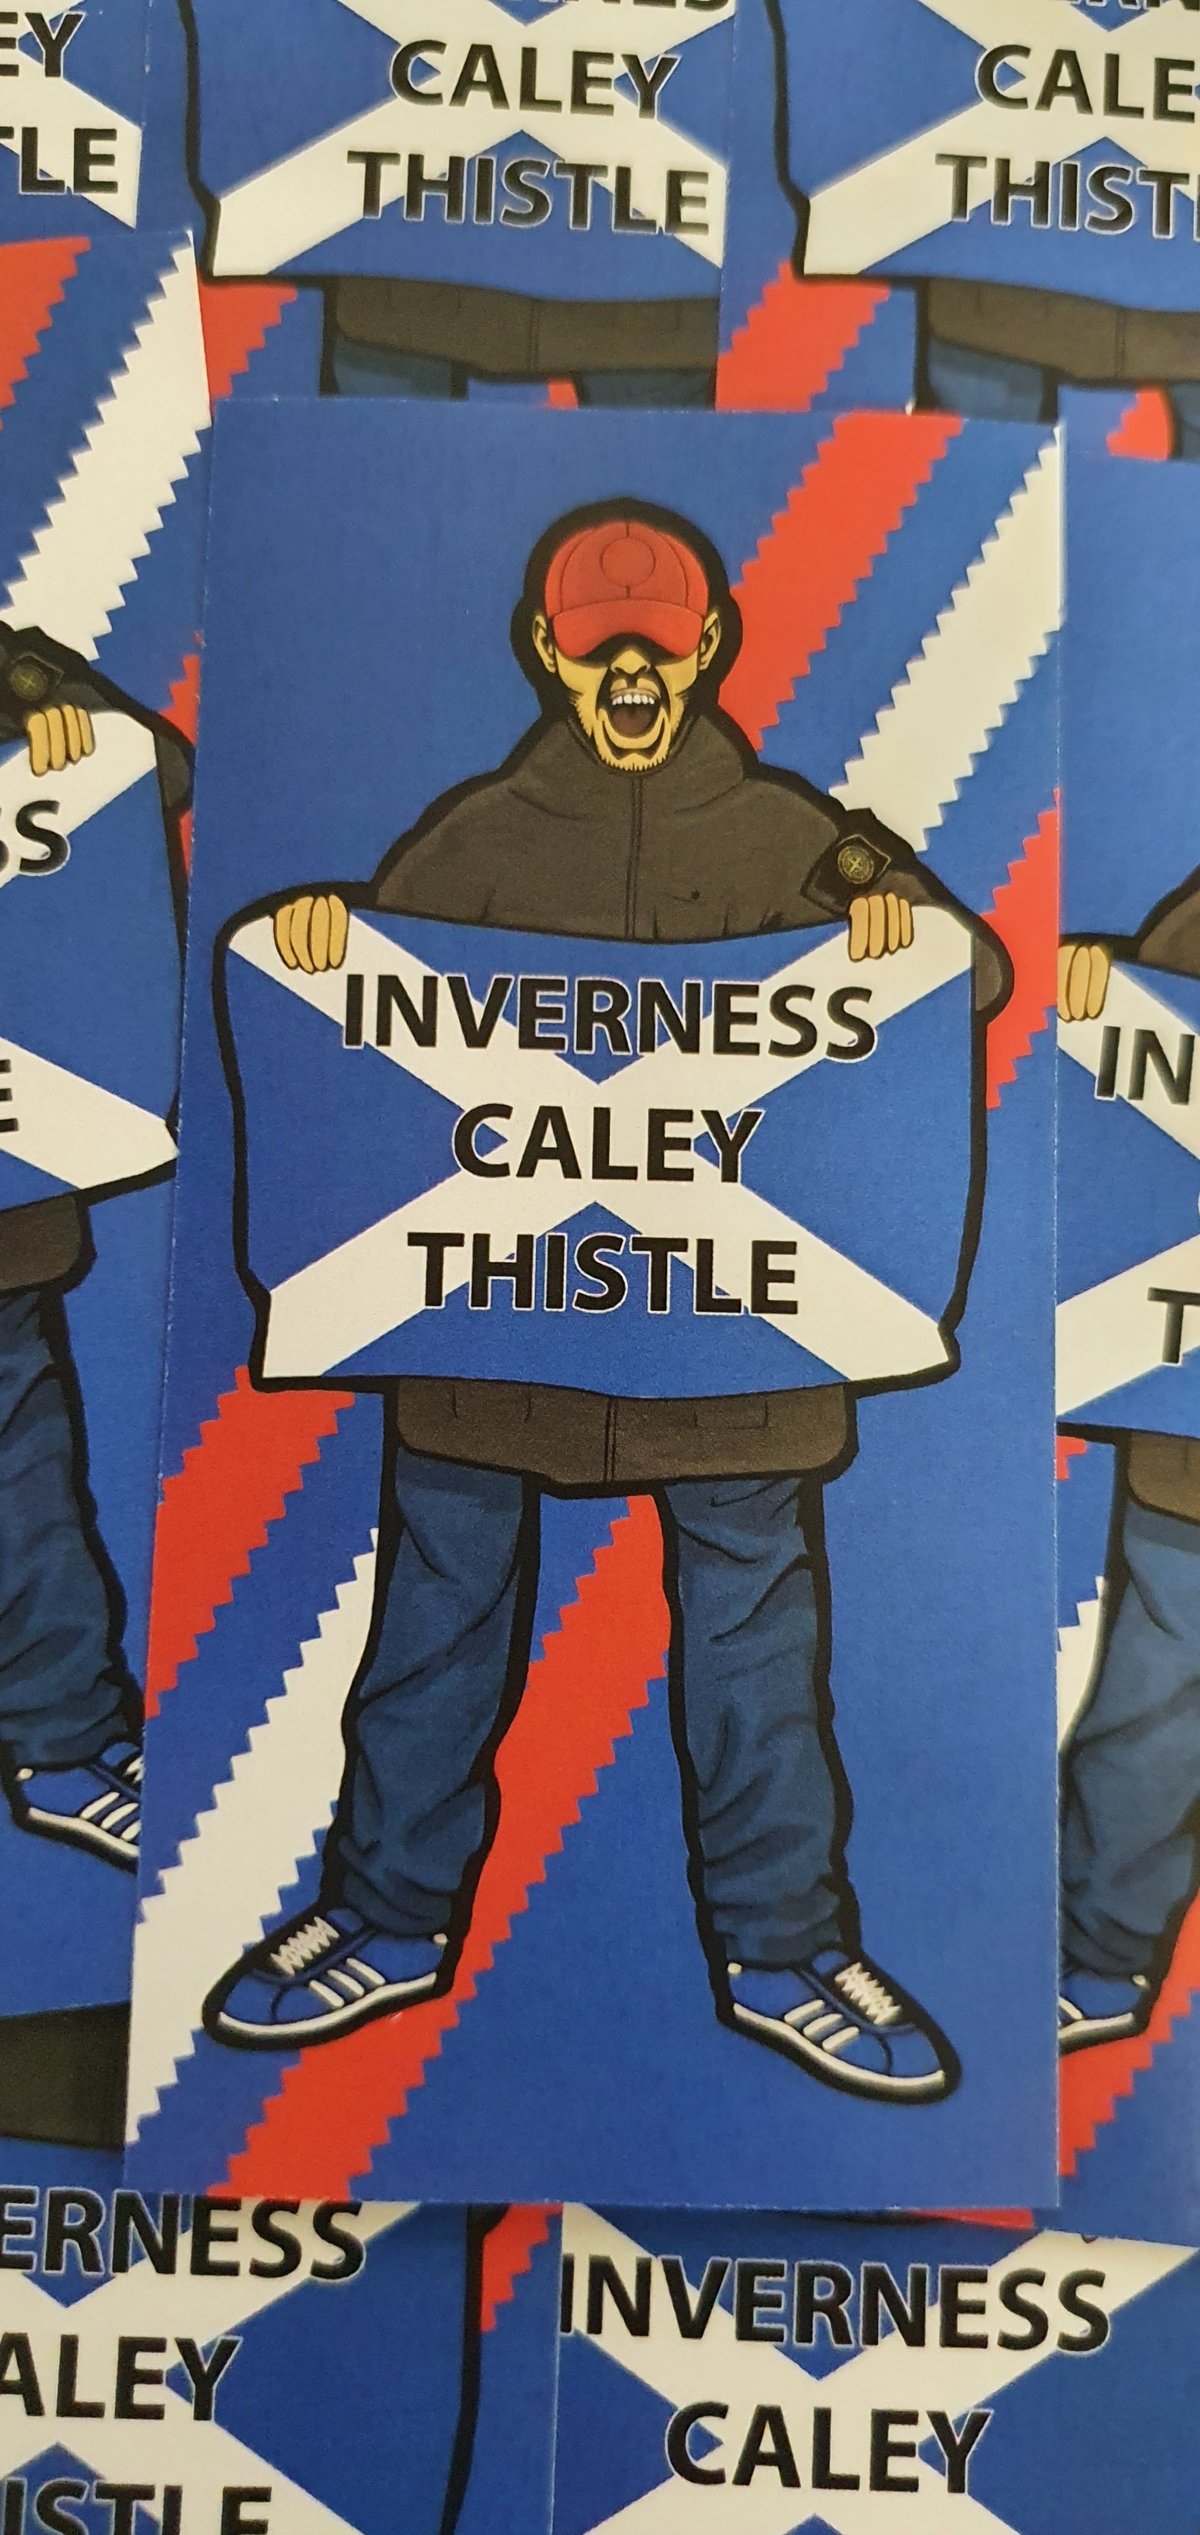 Pack of 25 10x5cm Inverness Caley Thistle Football/Ultras Stickers.